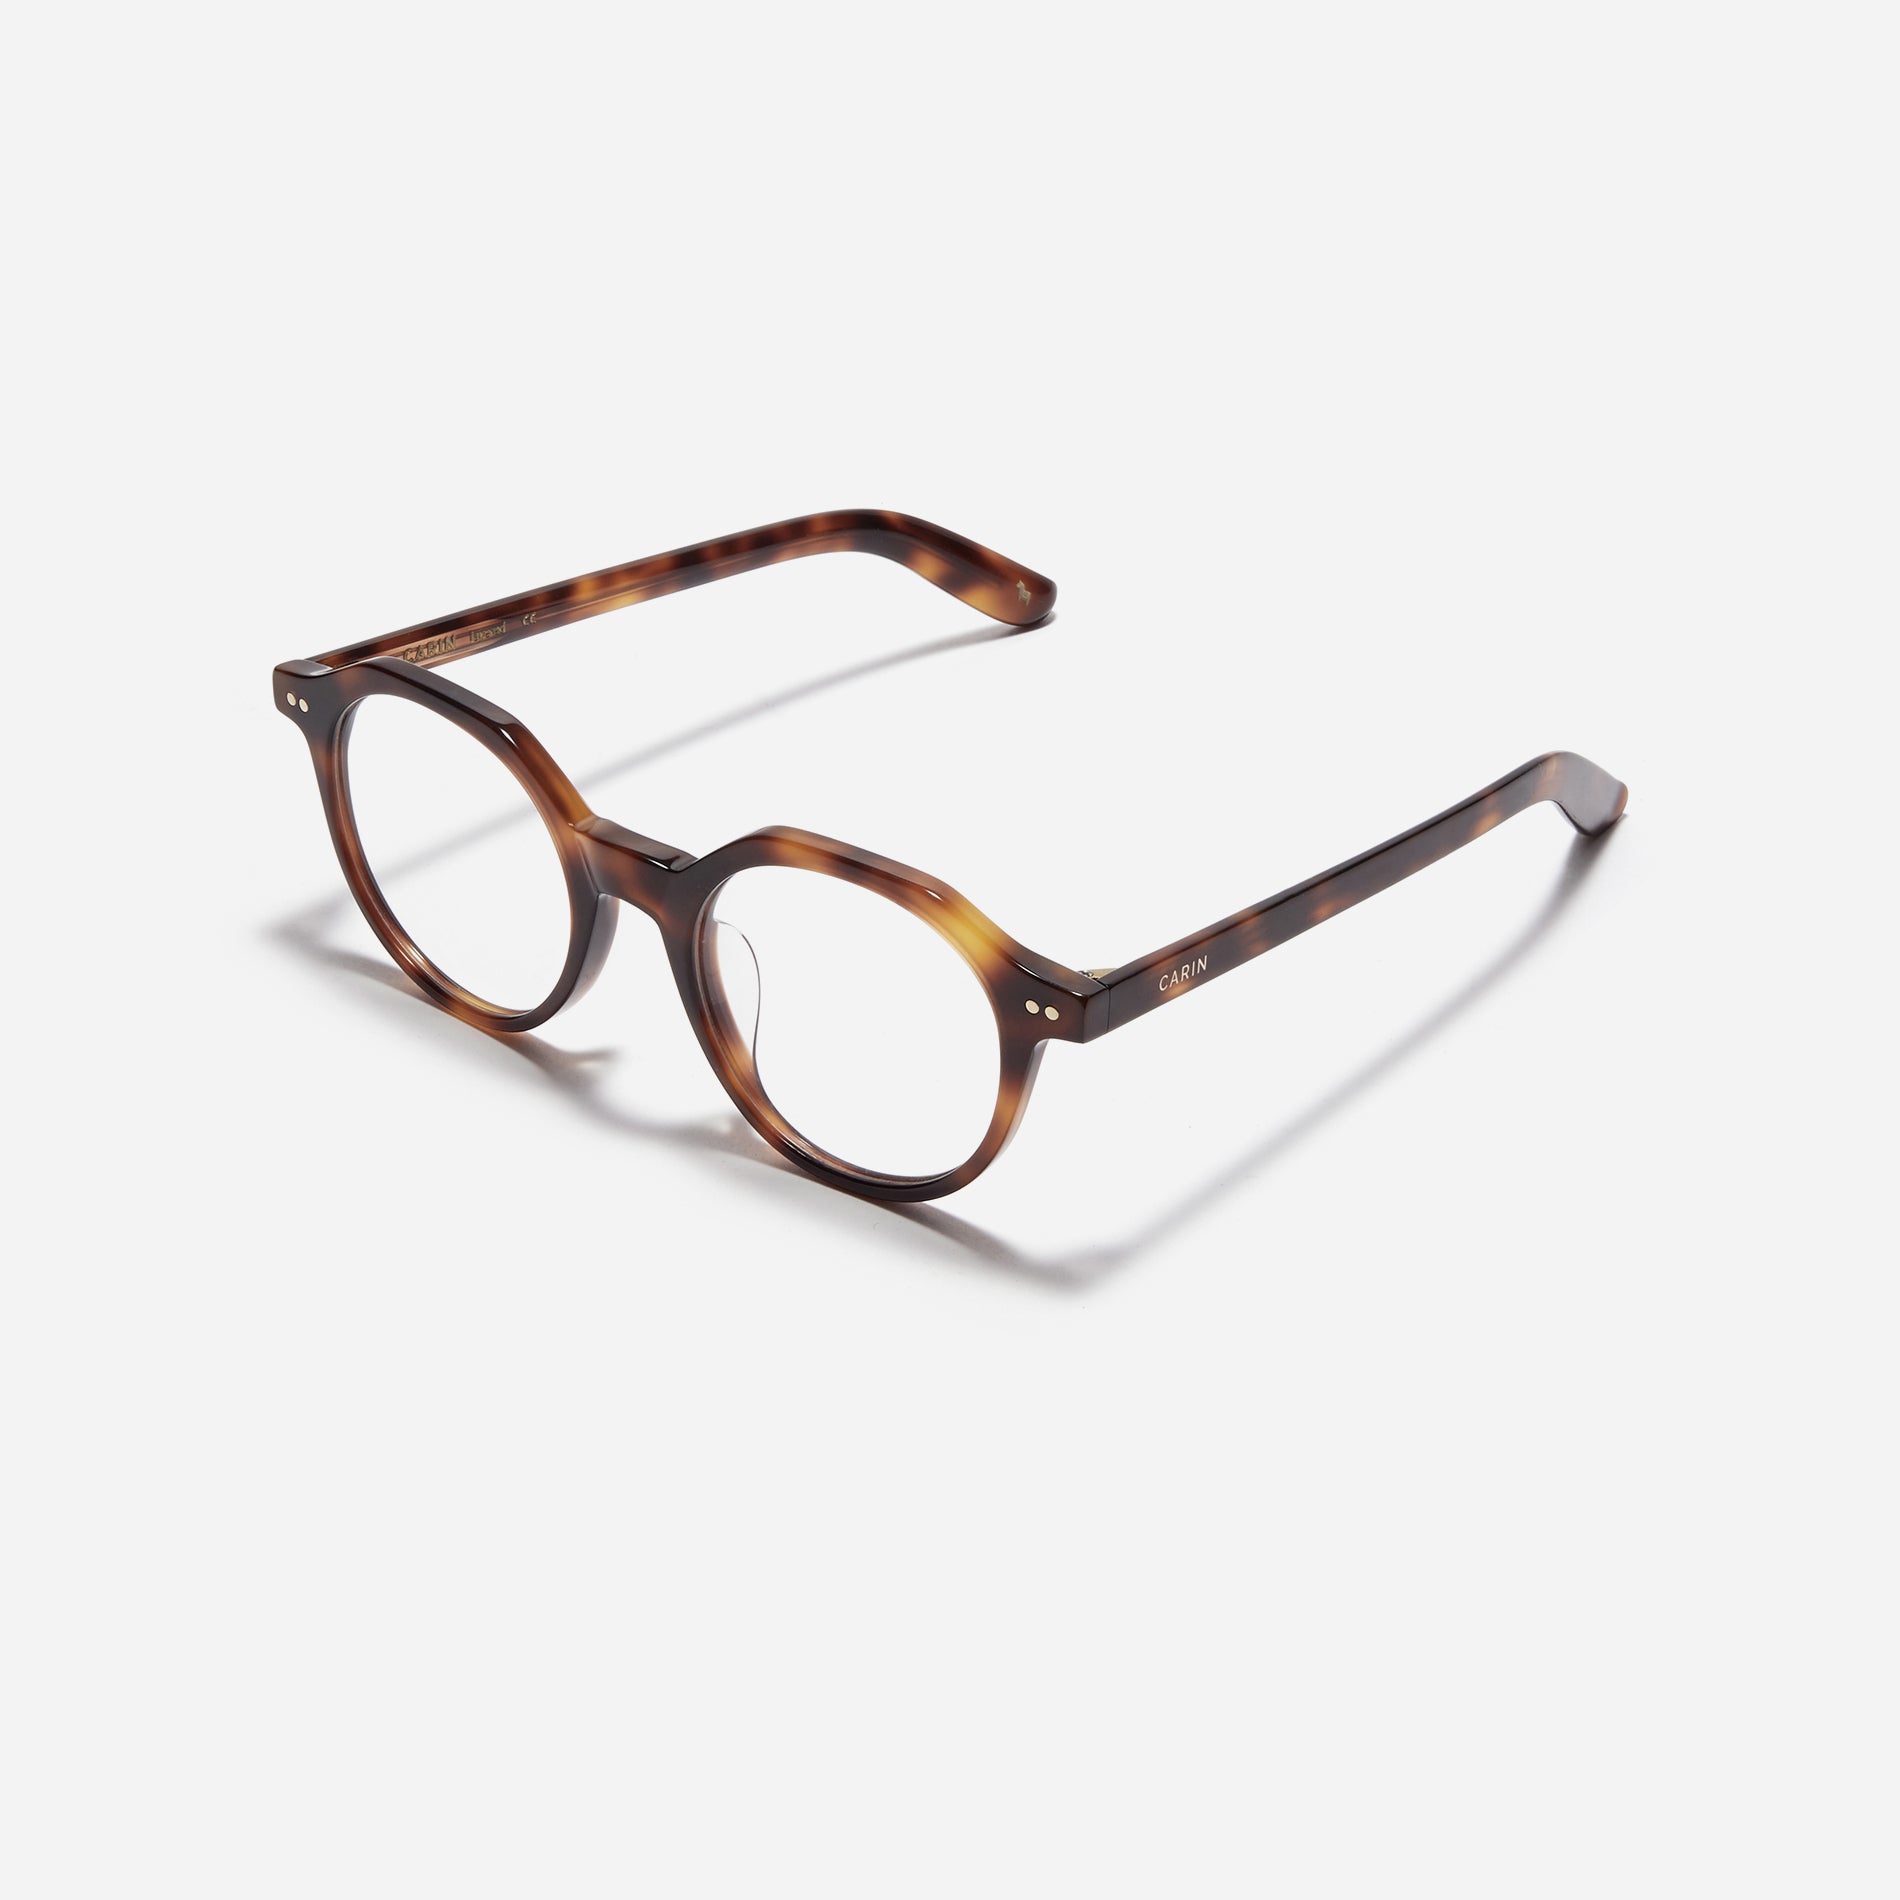 Polygon-shaped horn-rimmed eyeglasses. Embodying a modern reinterpretation of '90s retro vibes, their design is created for effortless styling. Featuring a distinctive bold frame and a stylish polygonal shape, these eyeglasses are available in a variety of colors.